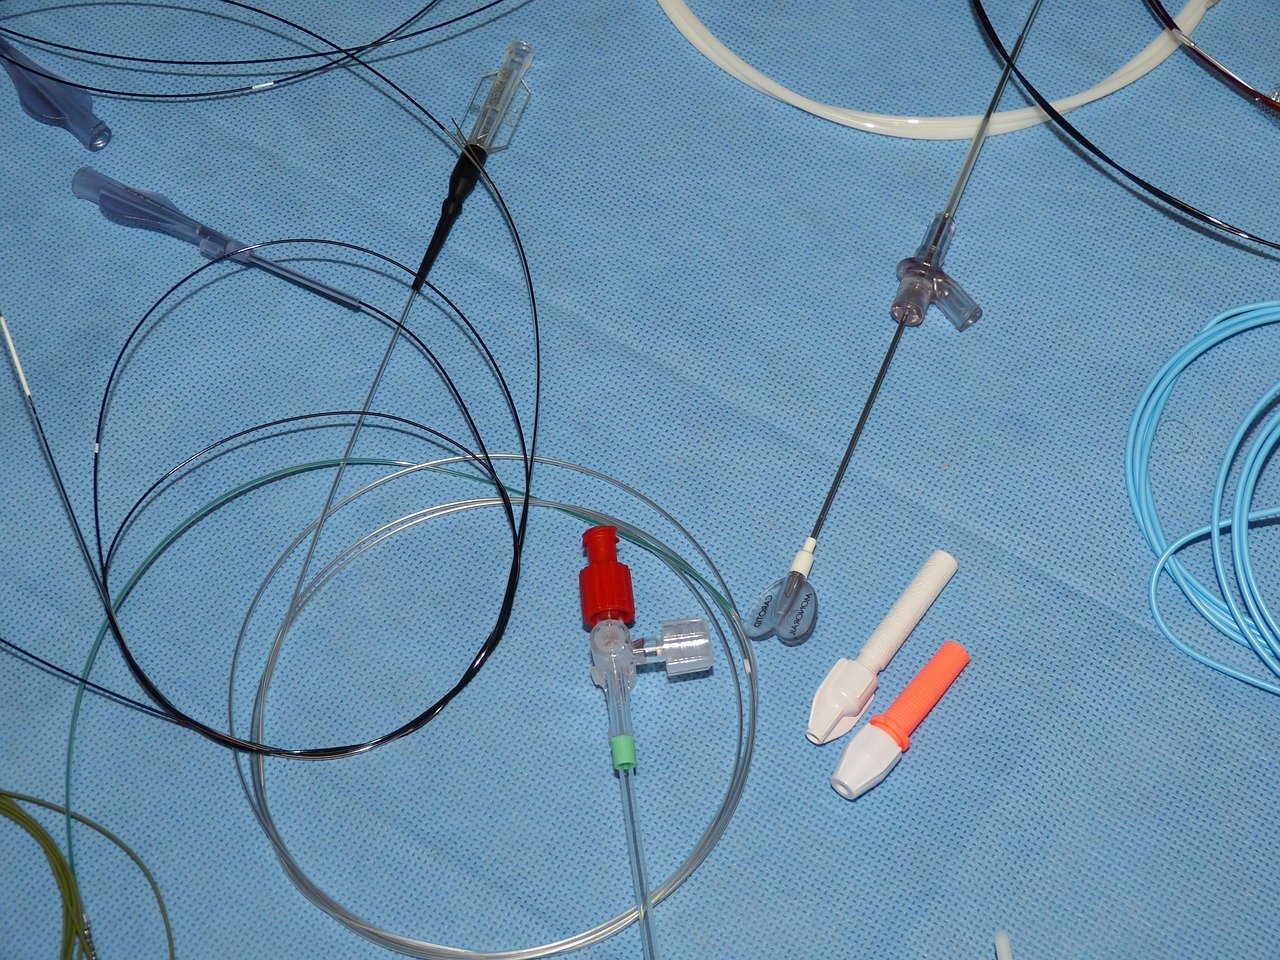 An In-depth Look at Minimally Invasive Catheter Manufacturing